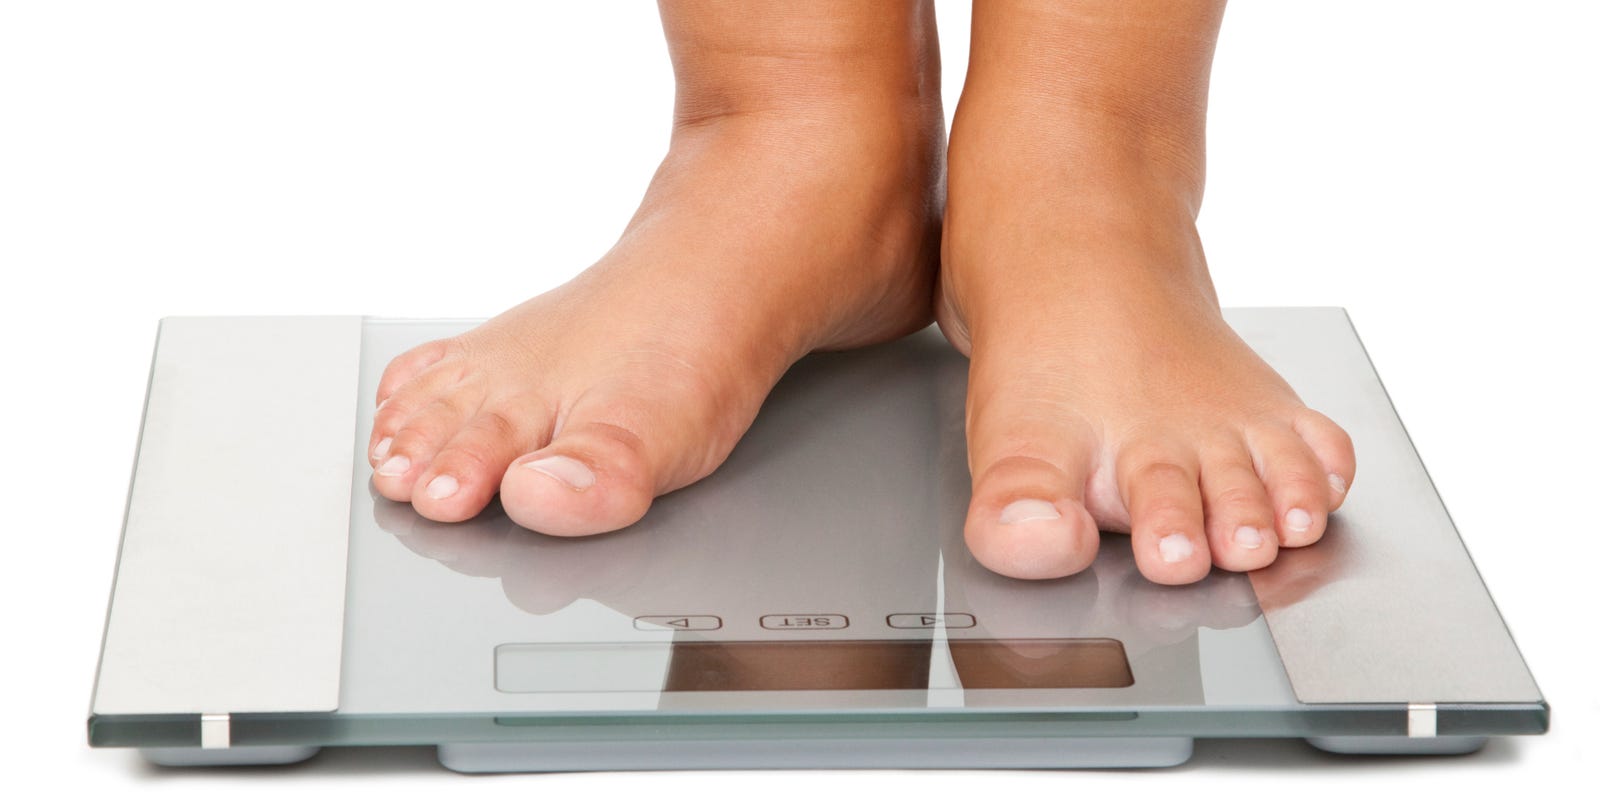 New Advice For Weight Loss Get On The Scale Every Day